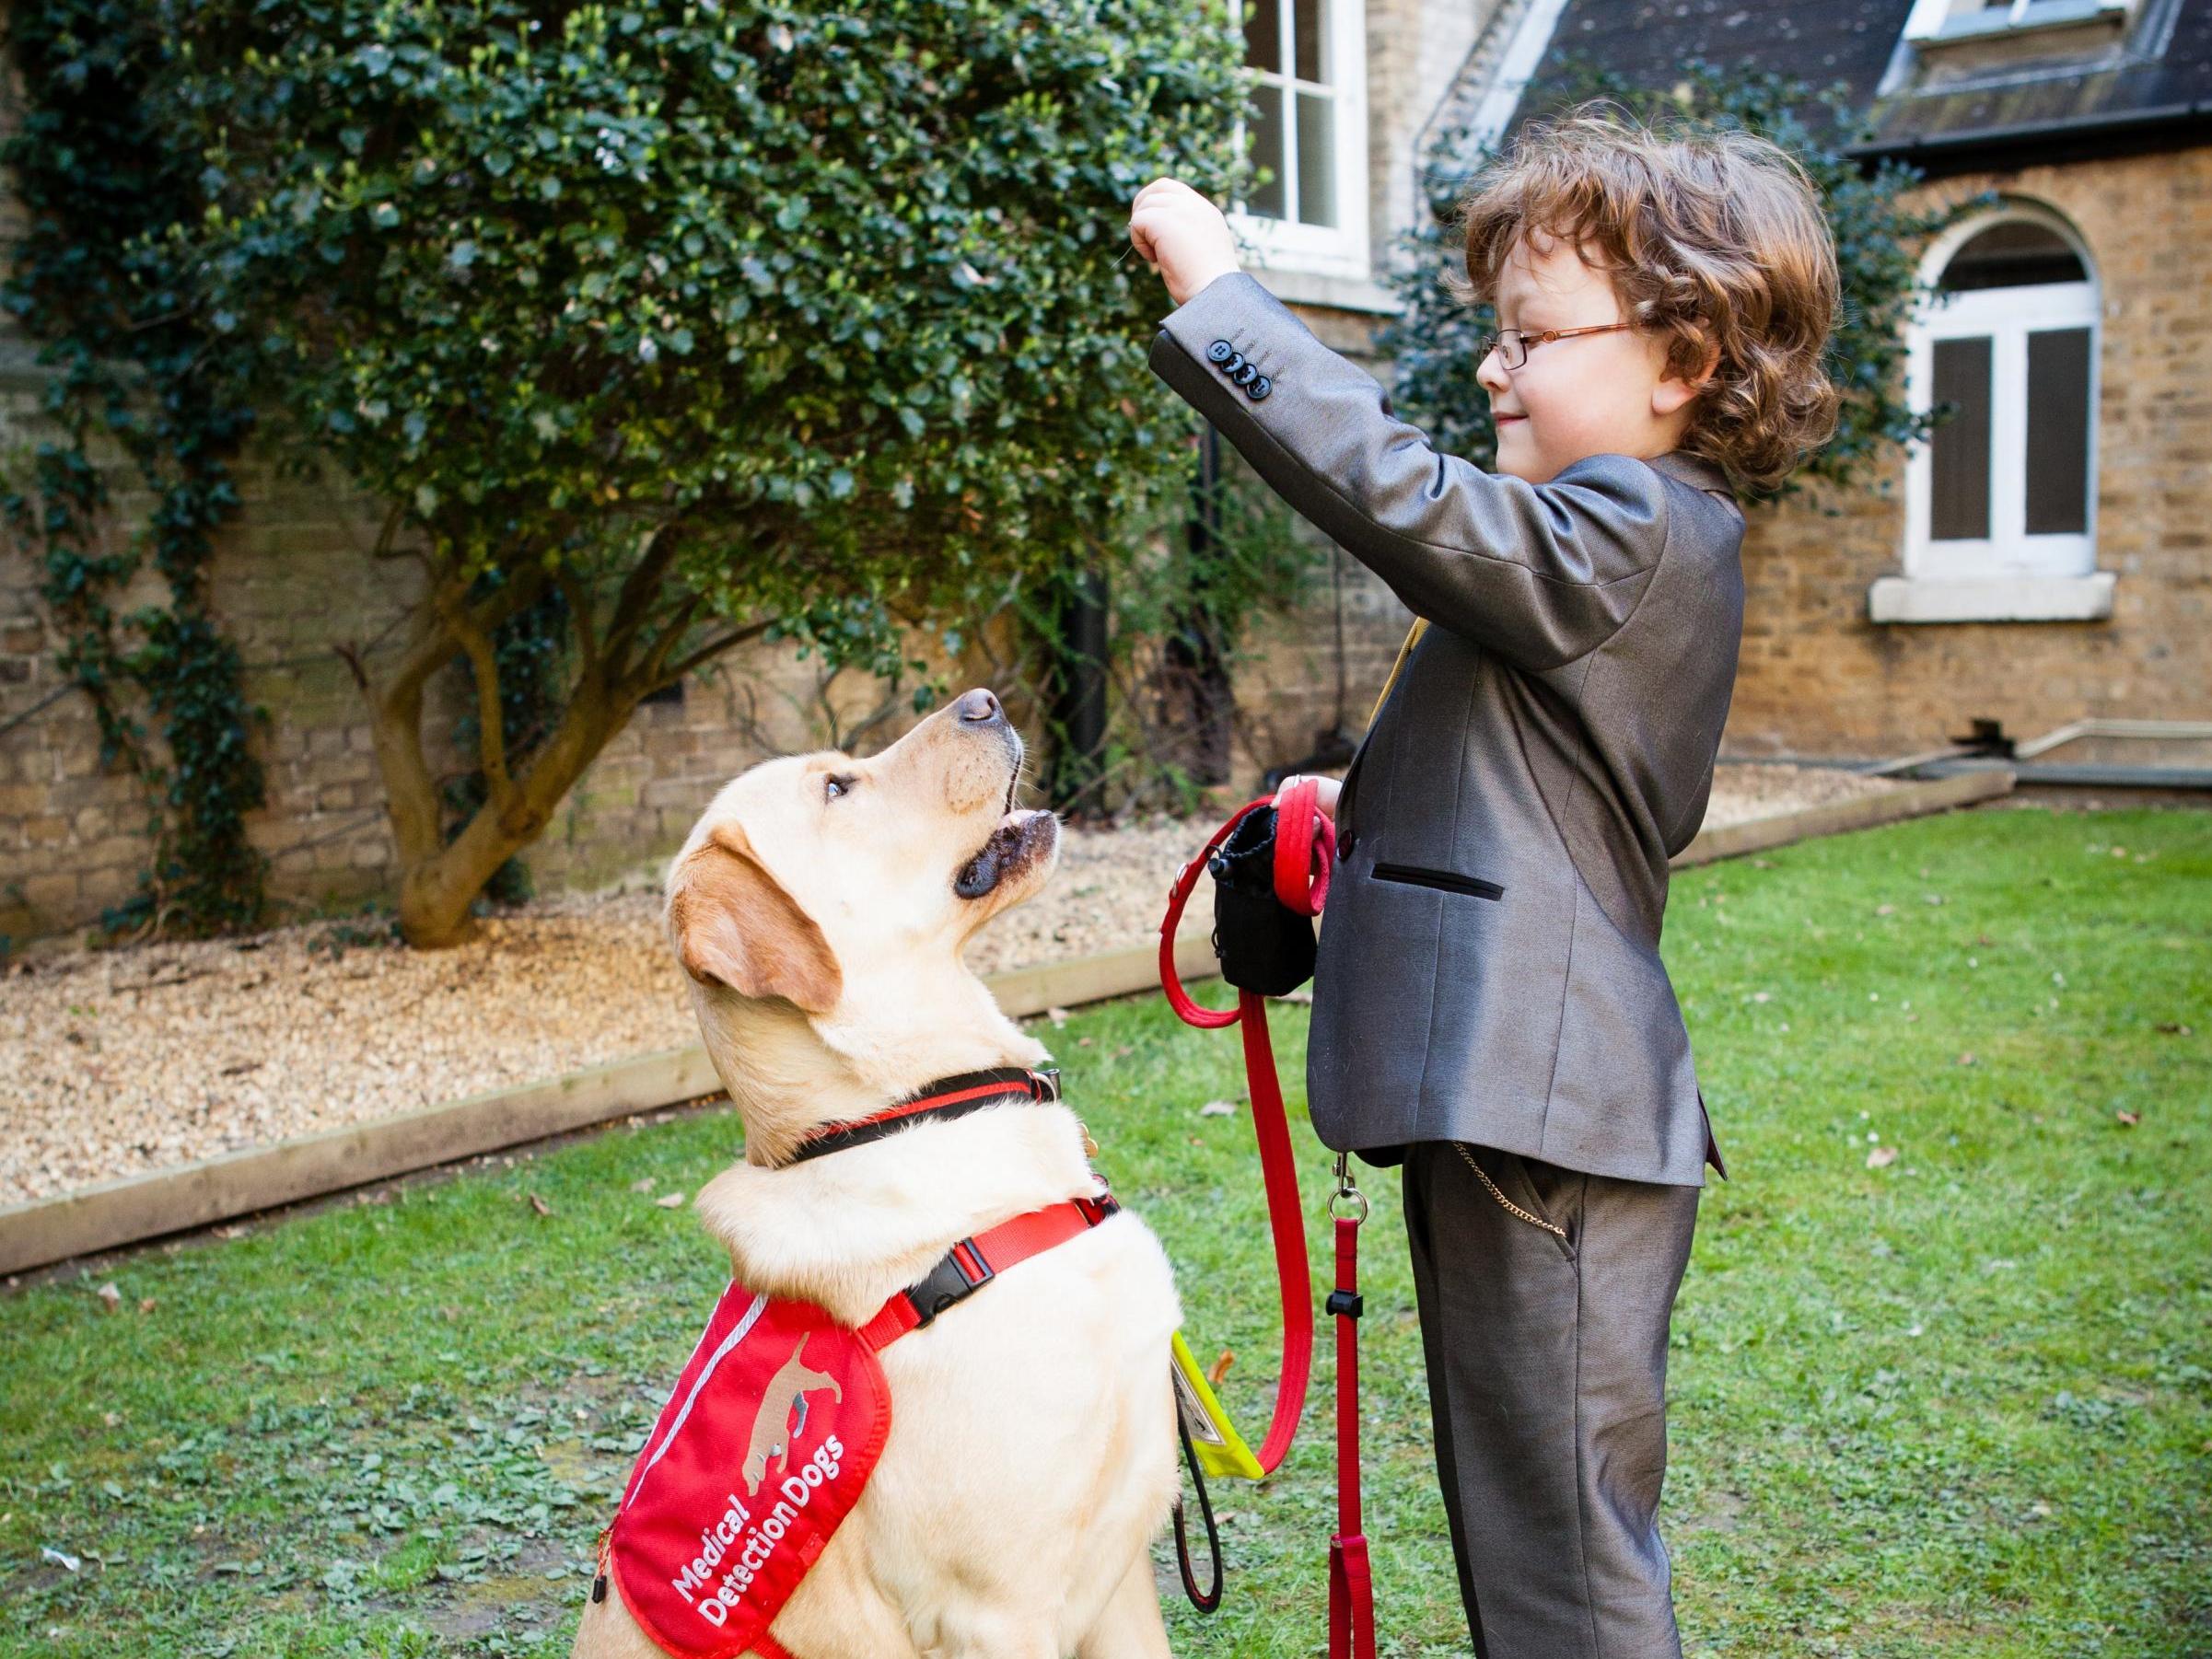 Archie was diagnosed with type 1 diabetes just after his first birthday and teamed up with detection dog Domino